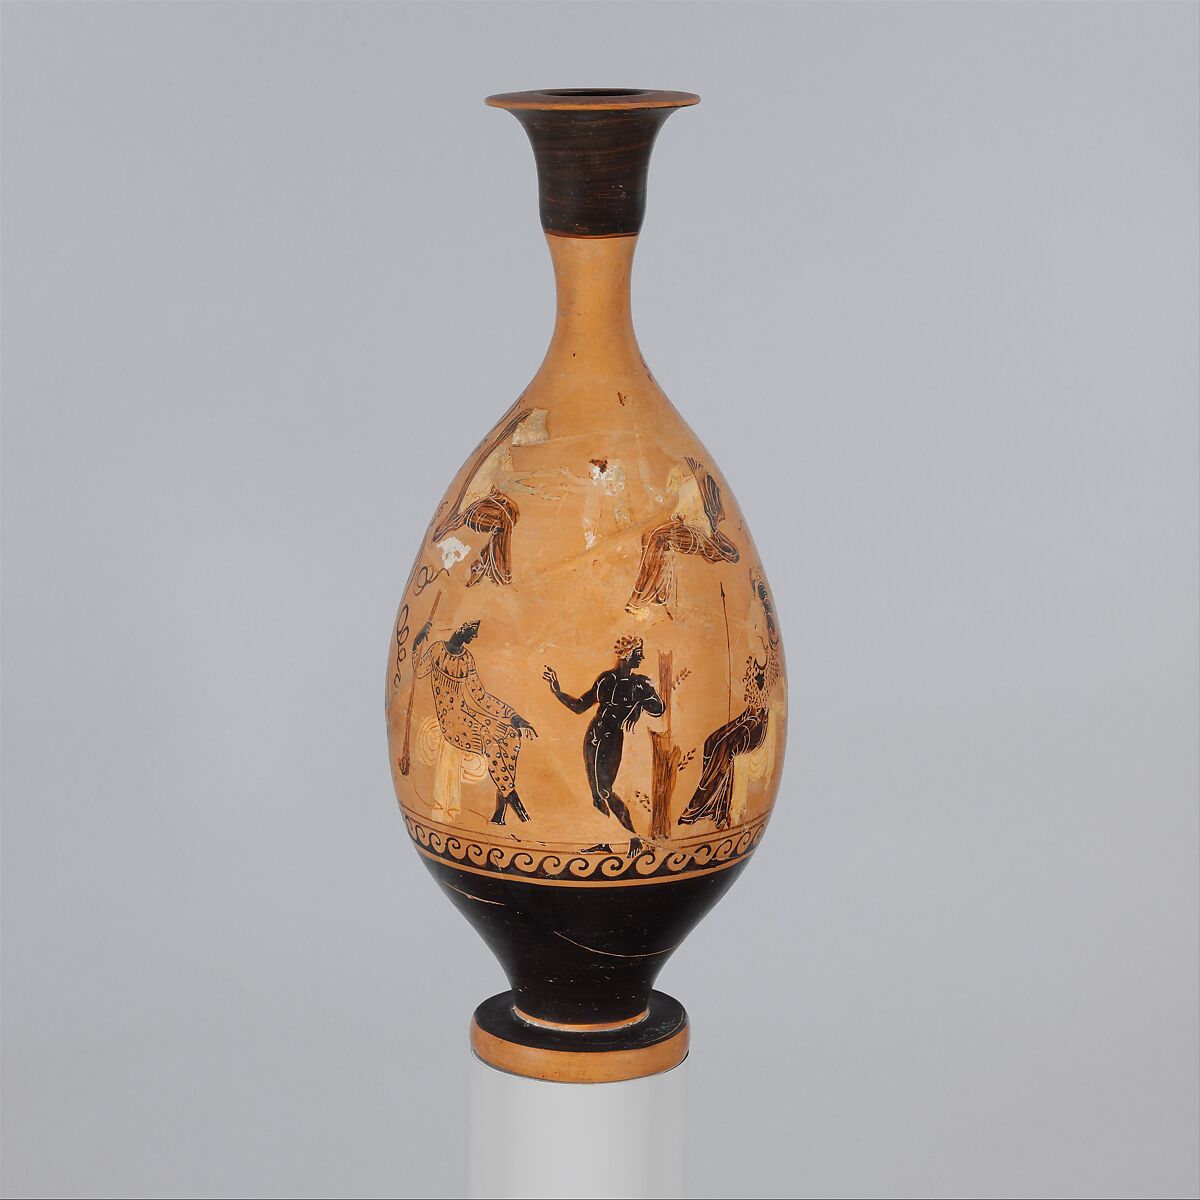 Terracotta lekythos (oil flask), Attributed to the Pagenstecher Class, Terracotta, Greek, South Italian, probably Paestan 